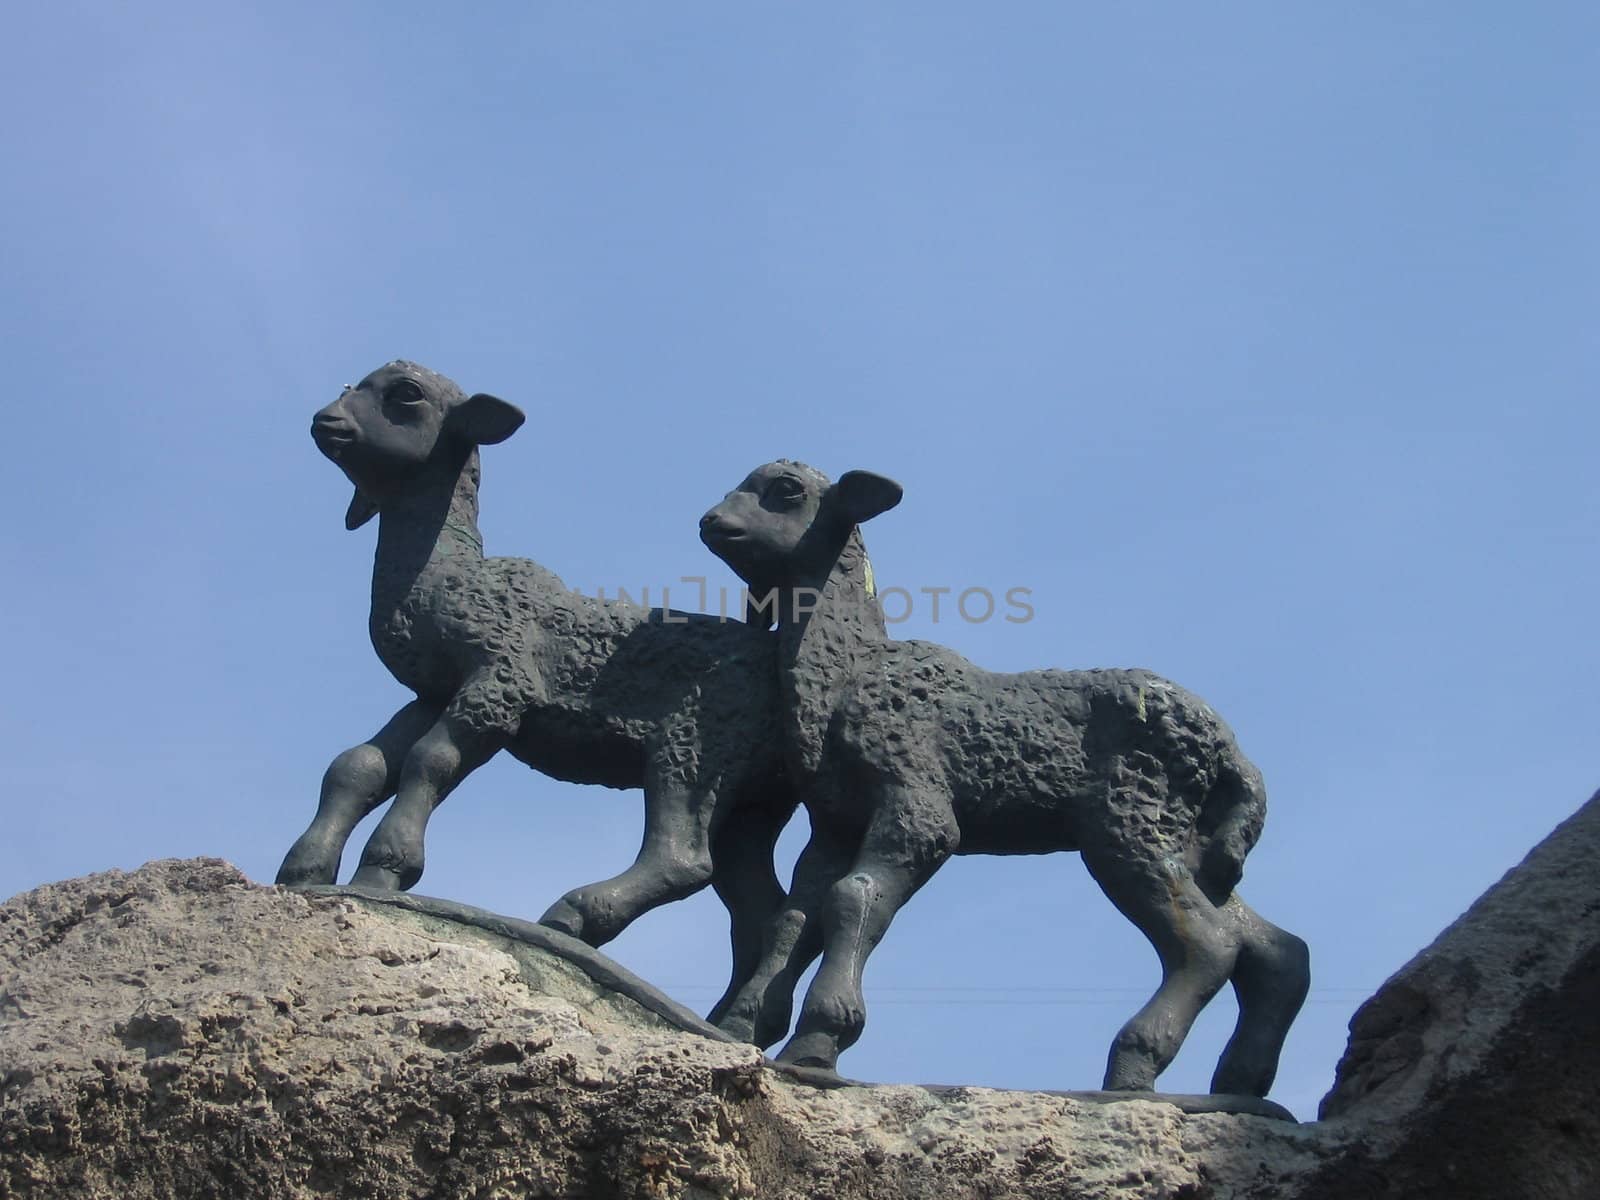 A nice lambs stone statue in Moscow zoo